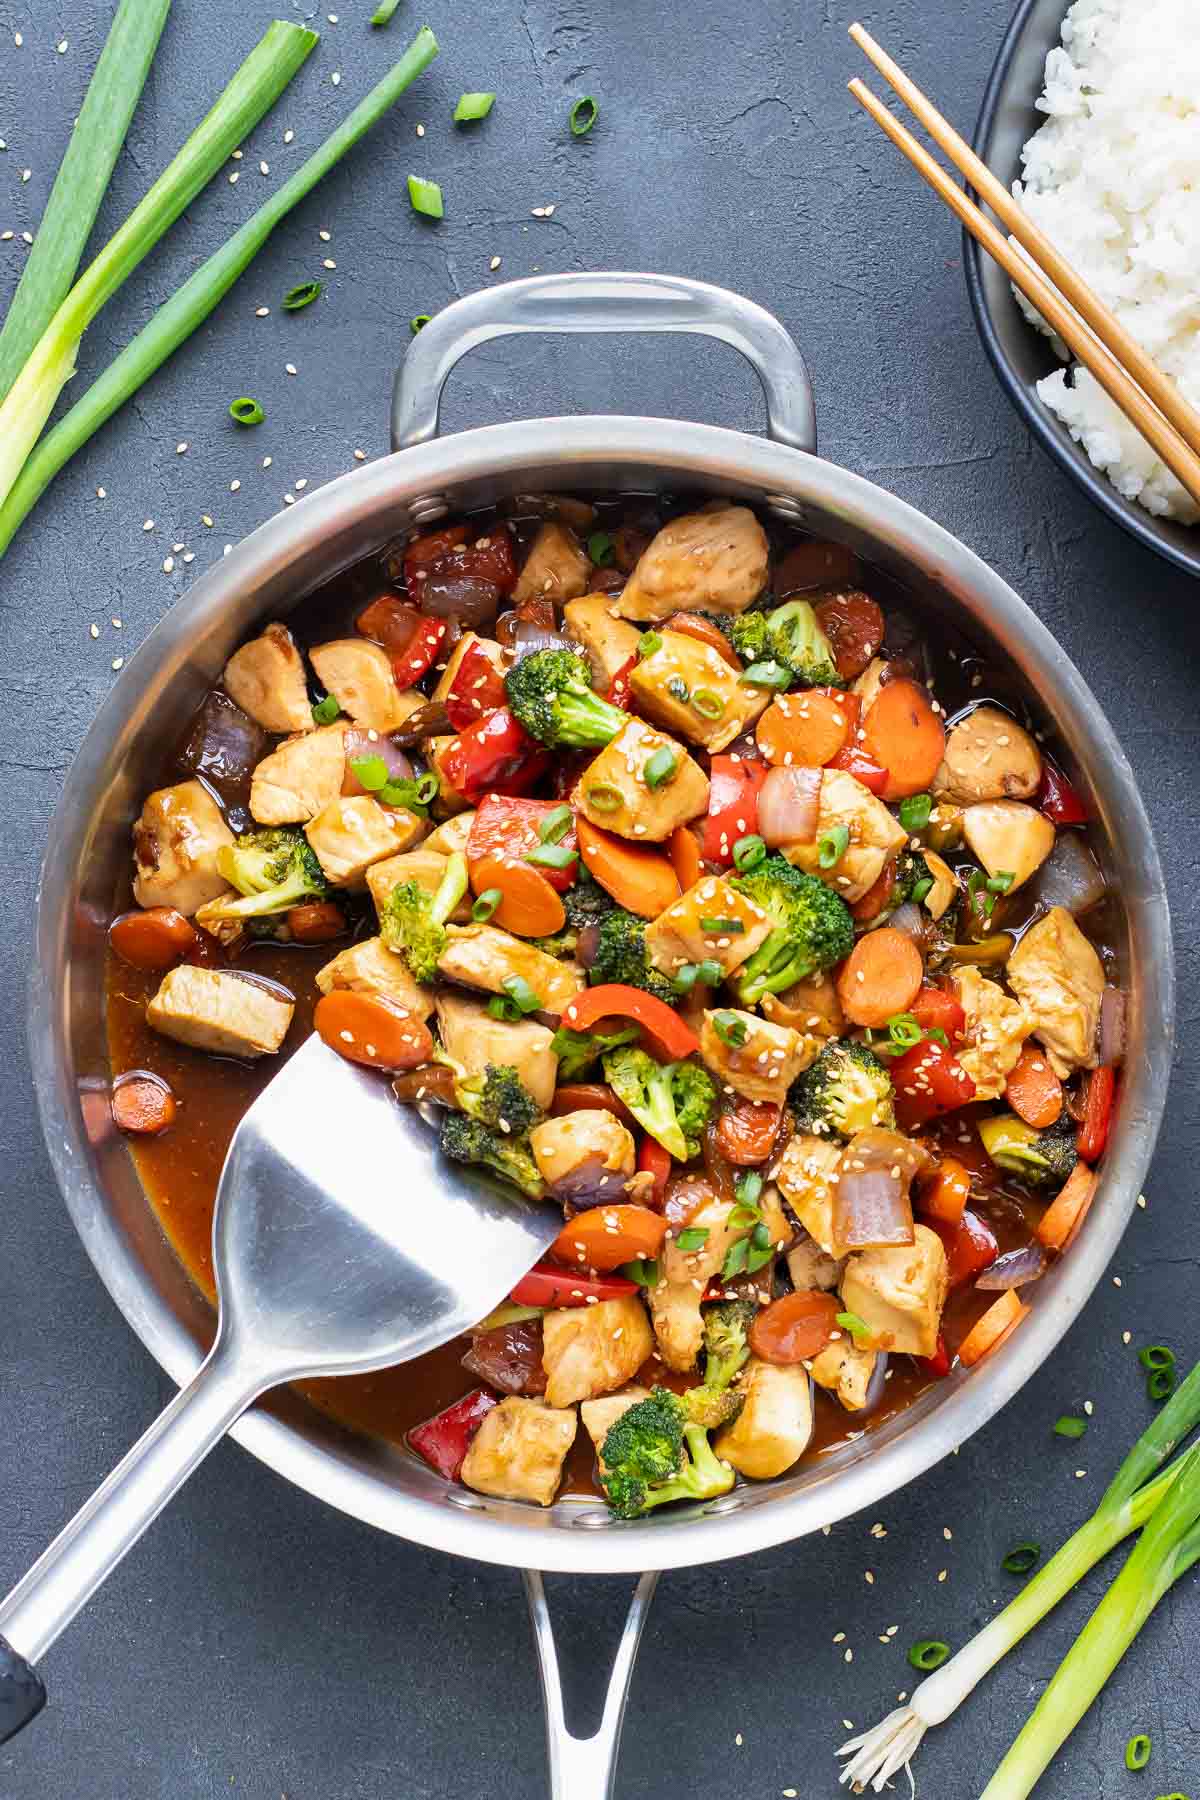 Teriyaki chicken stir fry in a stainless steel skillet with a spatula.